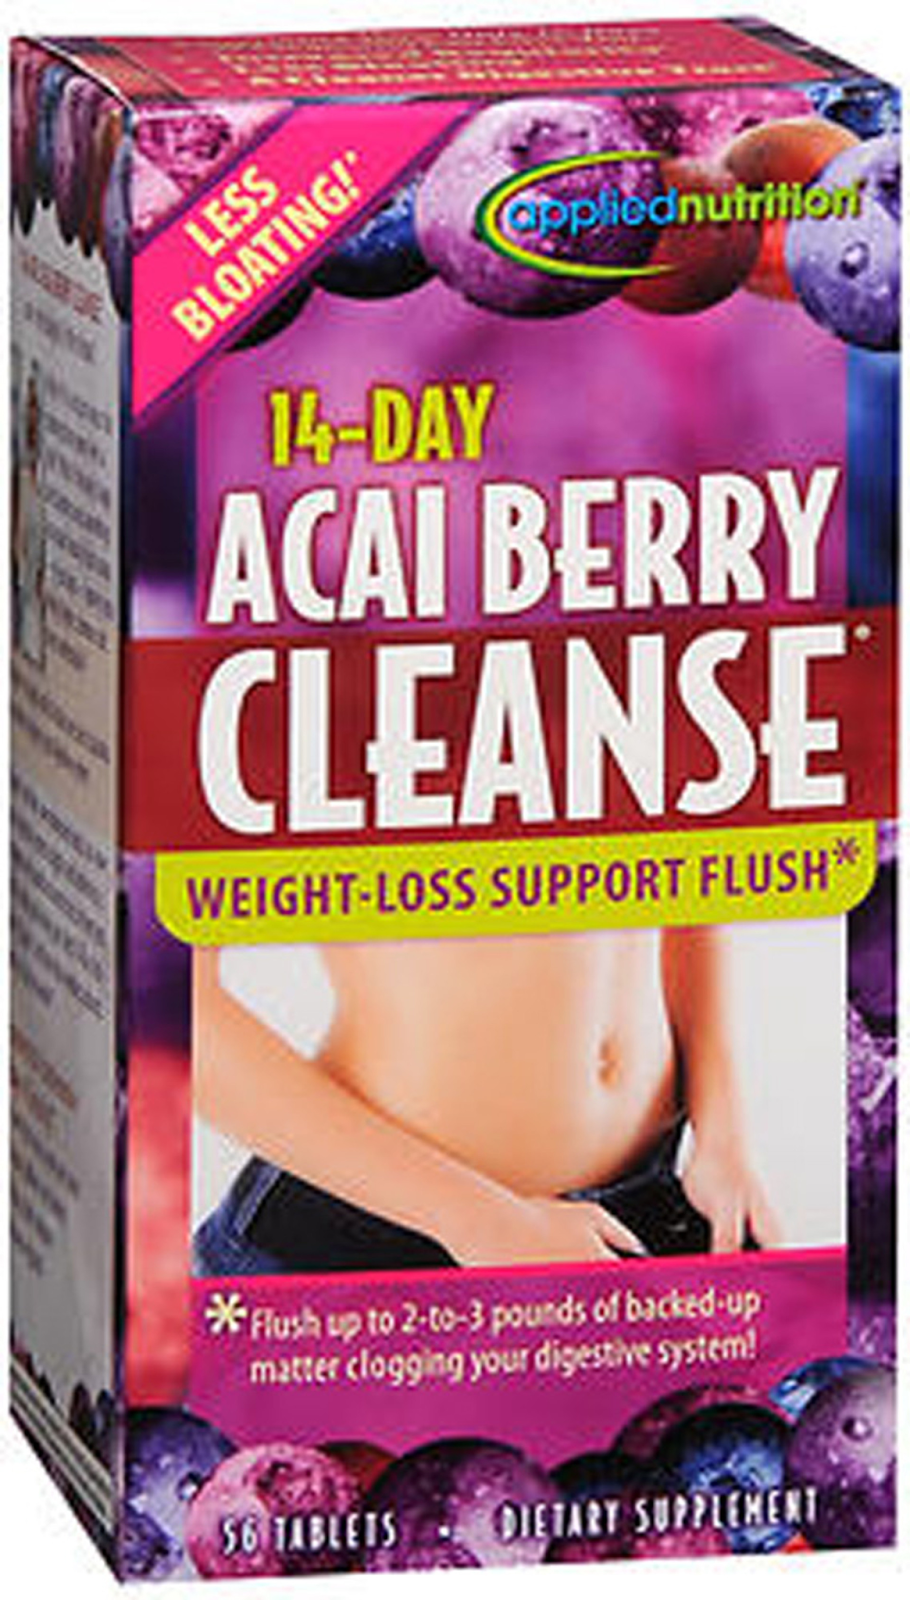 Acai berry cleanse tablets